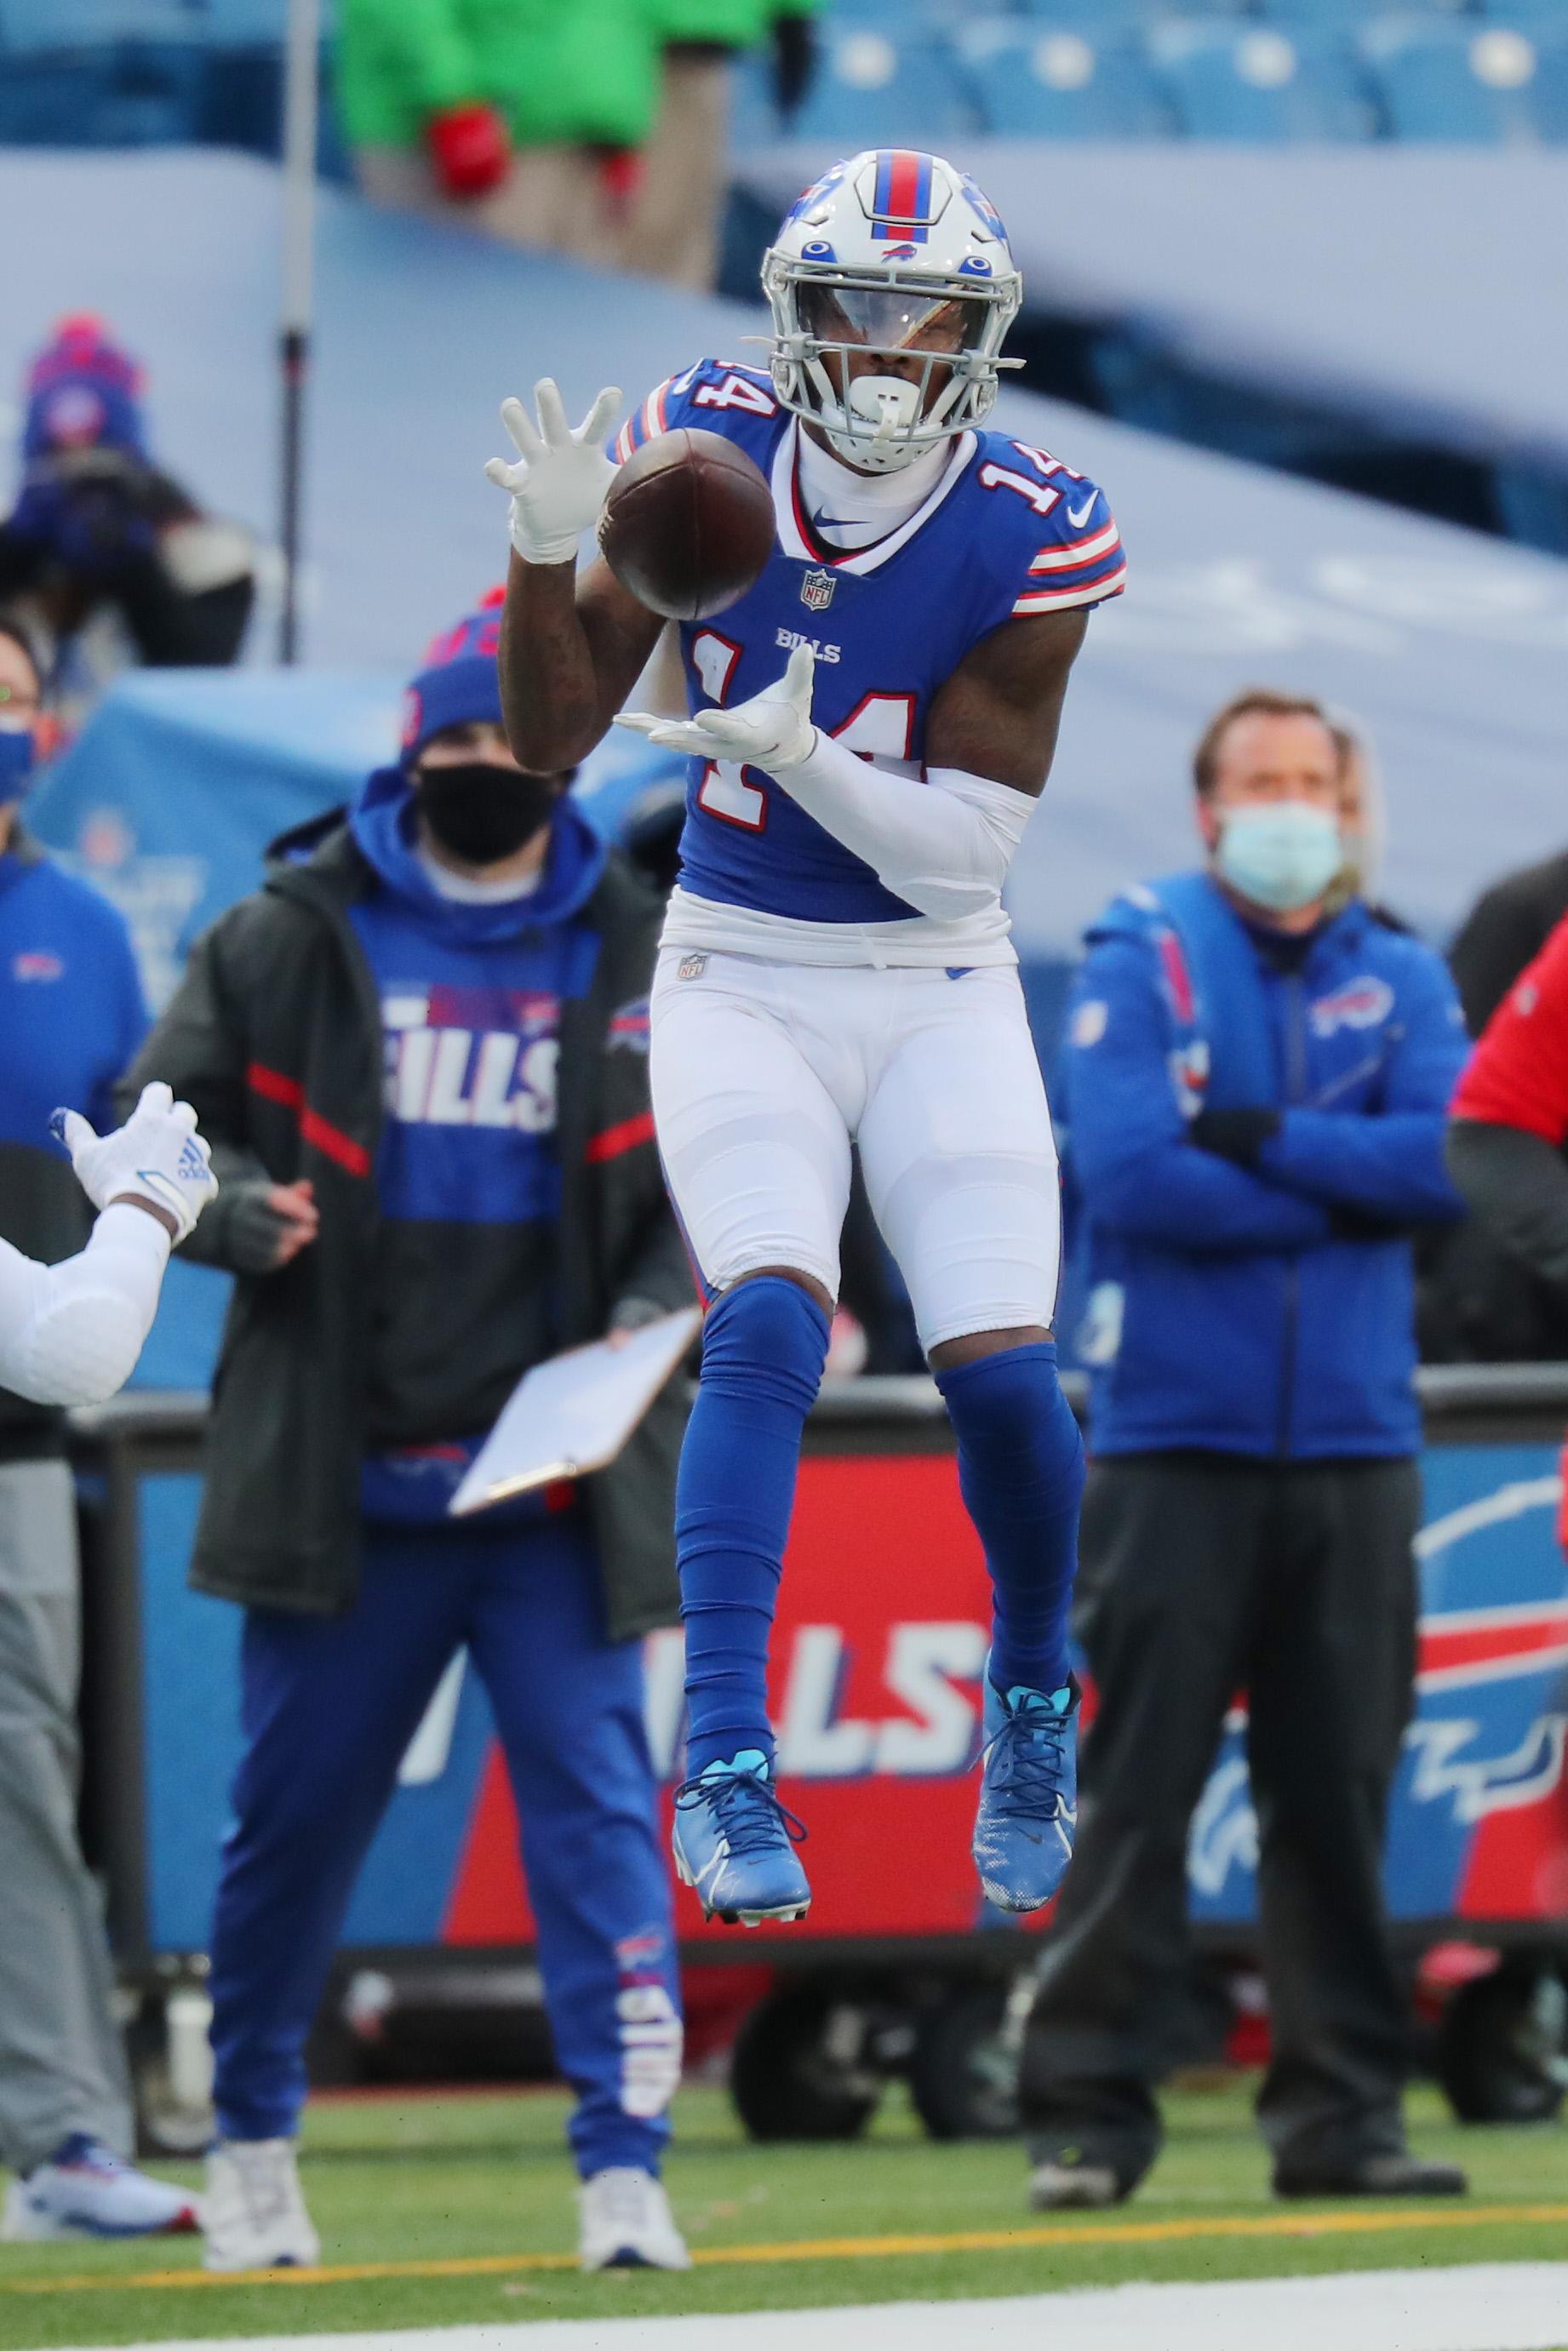 Gallery Photos Of The Bills Victory Over Colts In Afc Wild Card